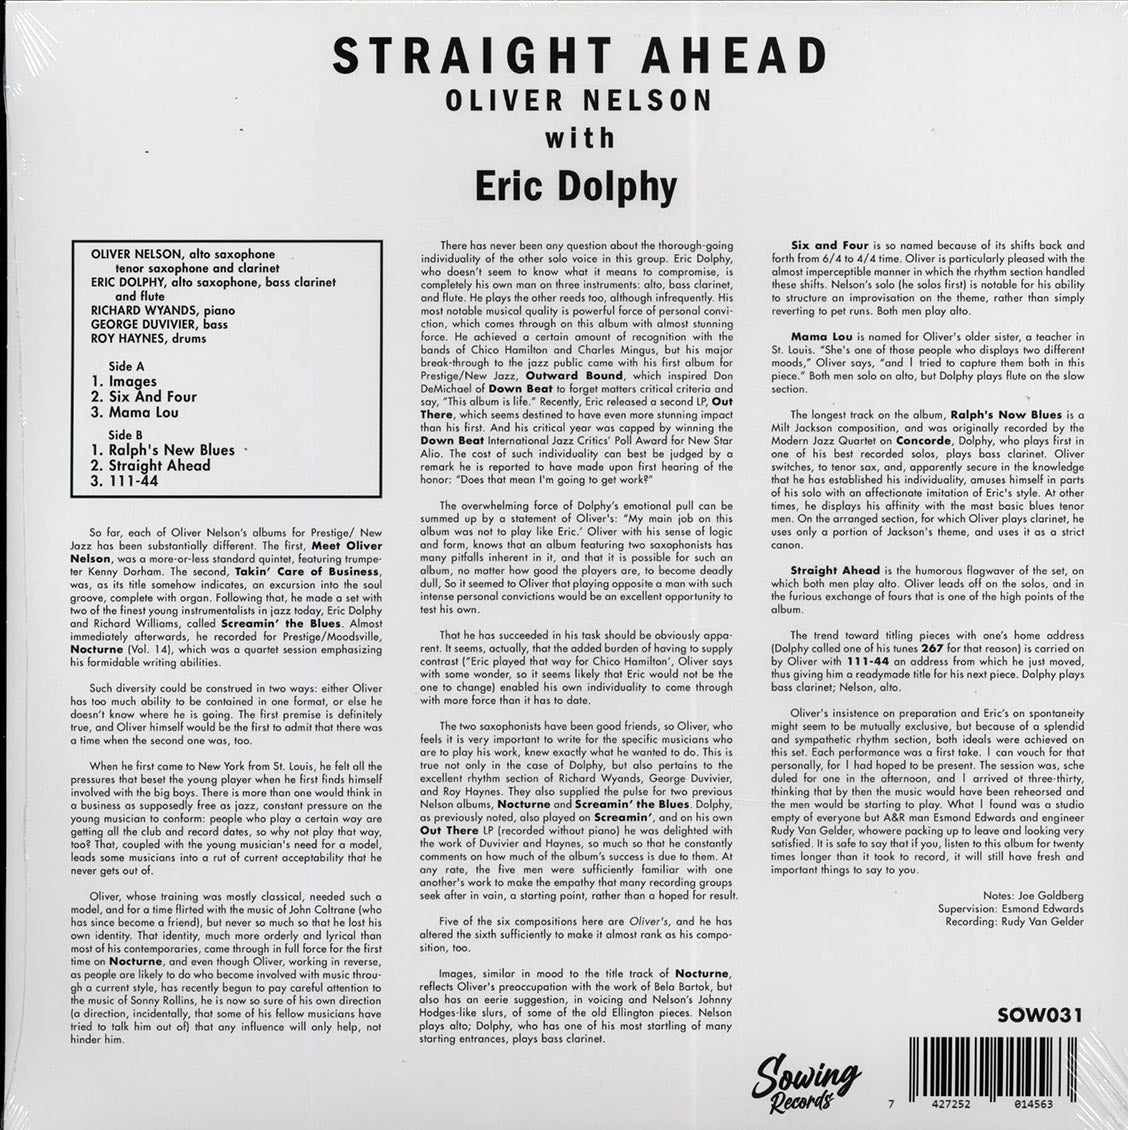 Oliver Nelson With Eric Dolphy - Straight Ahead [2022 Limited Clear] [New Vinyl Record LP]